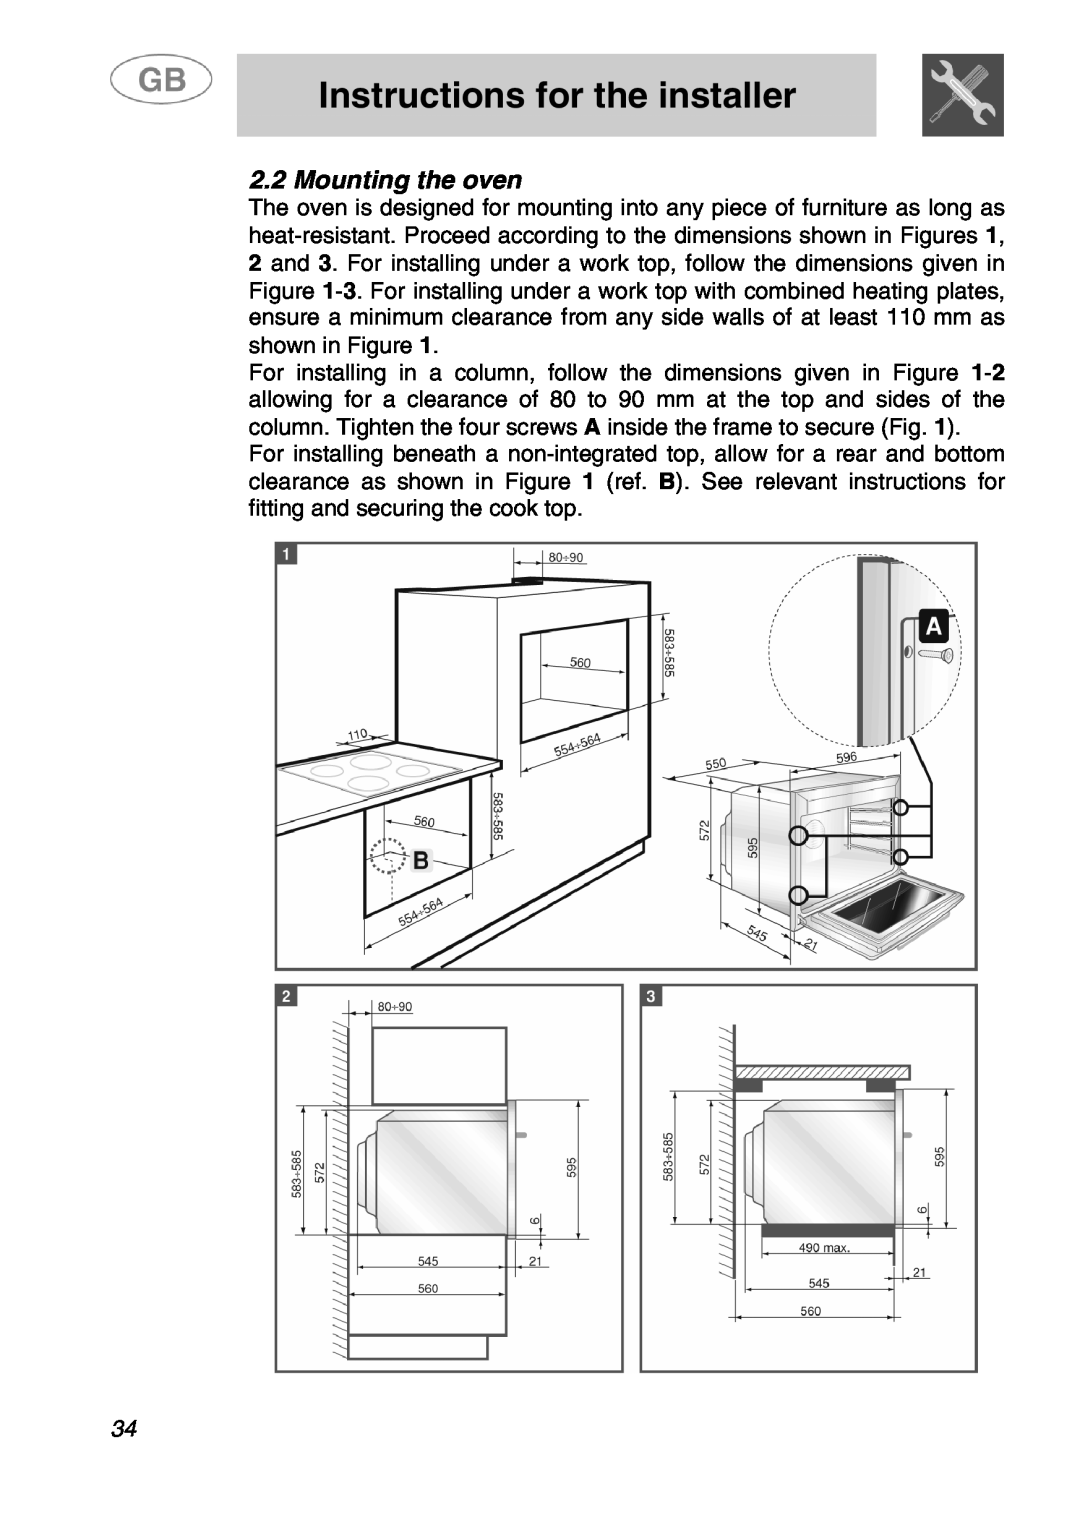 Smeg SA280X manual 2.2Mounting the oven, Instructions for the installer 